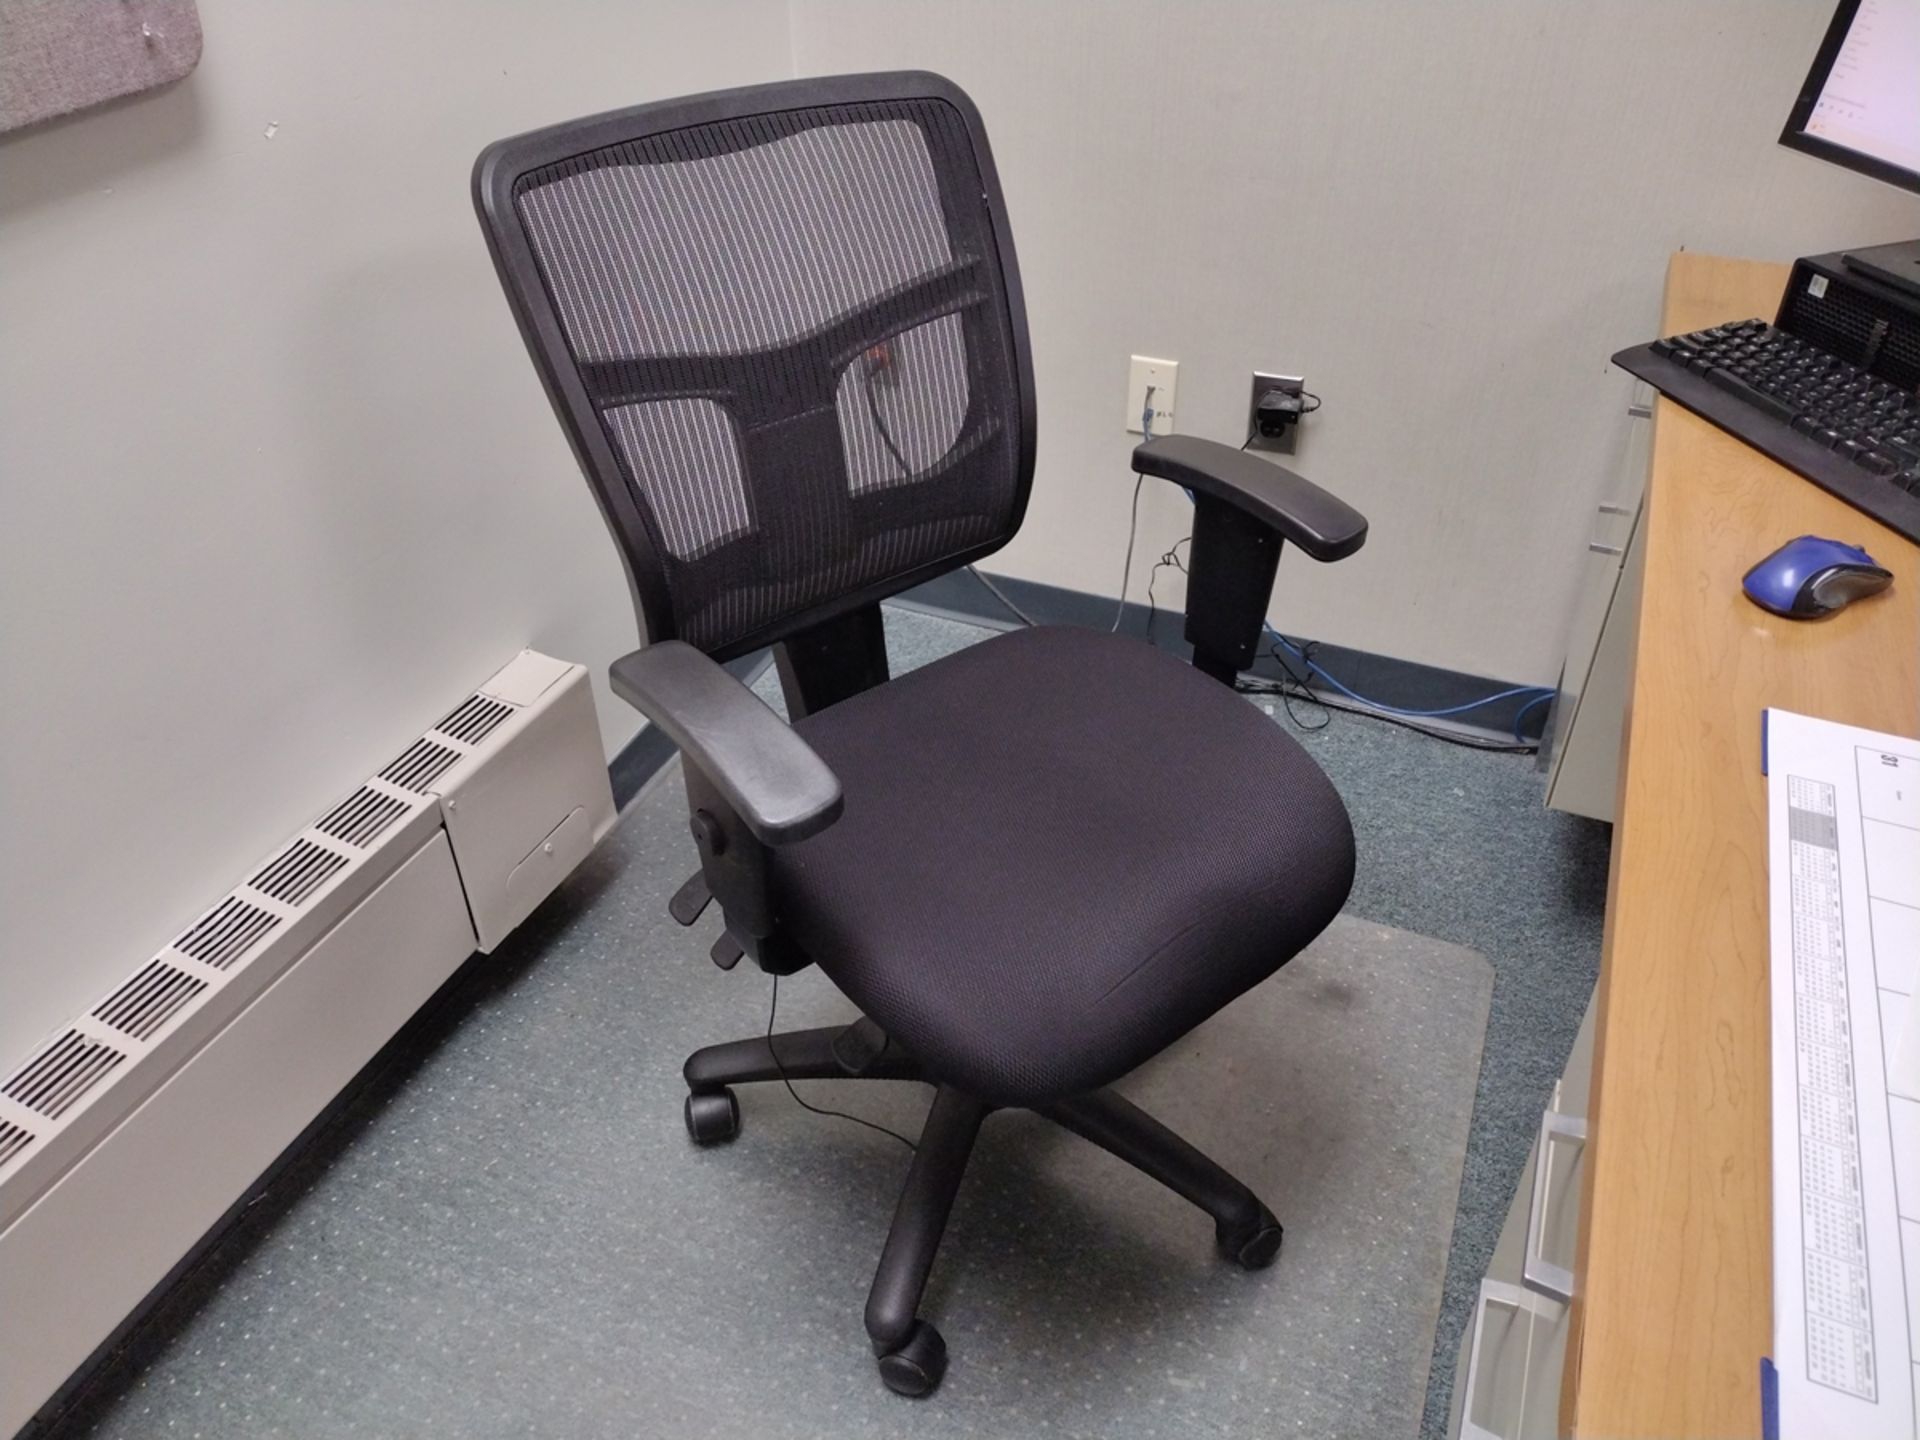 Group of Office Furniture Throughout Rooms - Image 2 of 8